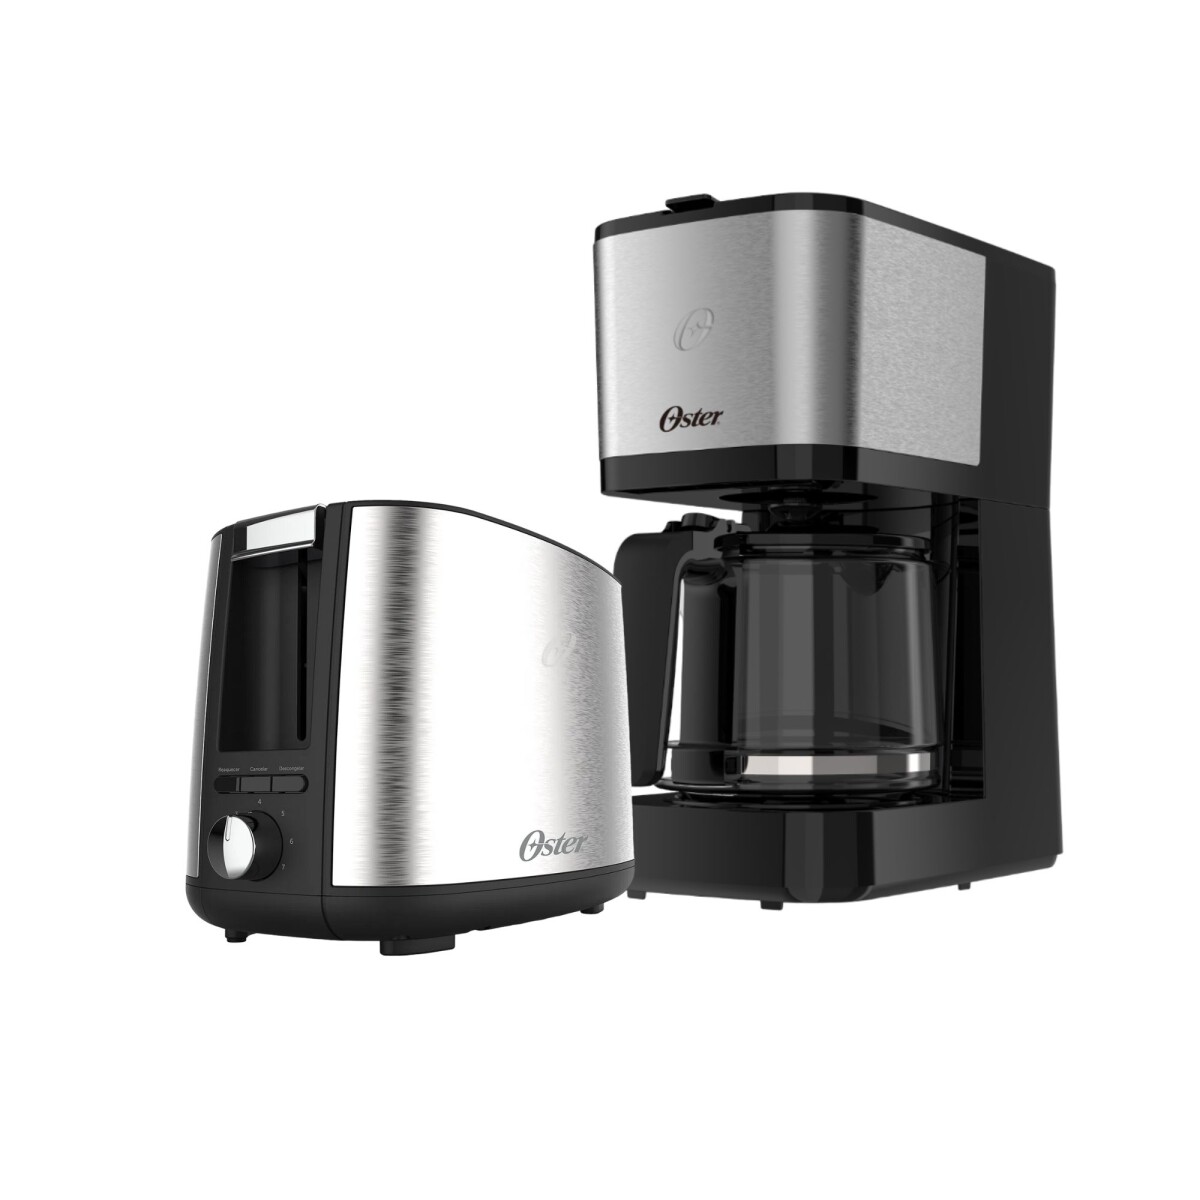 Kit Cafetera cuadrada Oster inoxidable 1,2 L y Tostadora Oster Inox Simple Life 